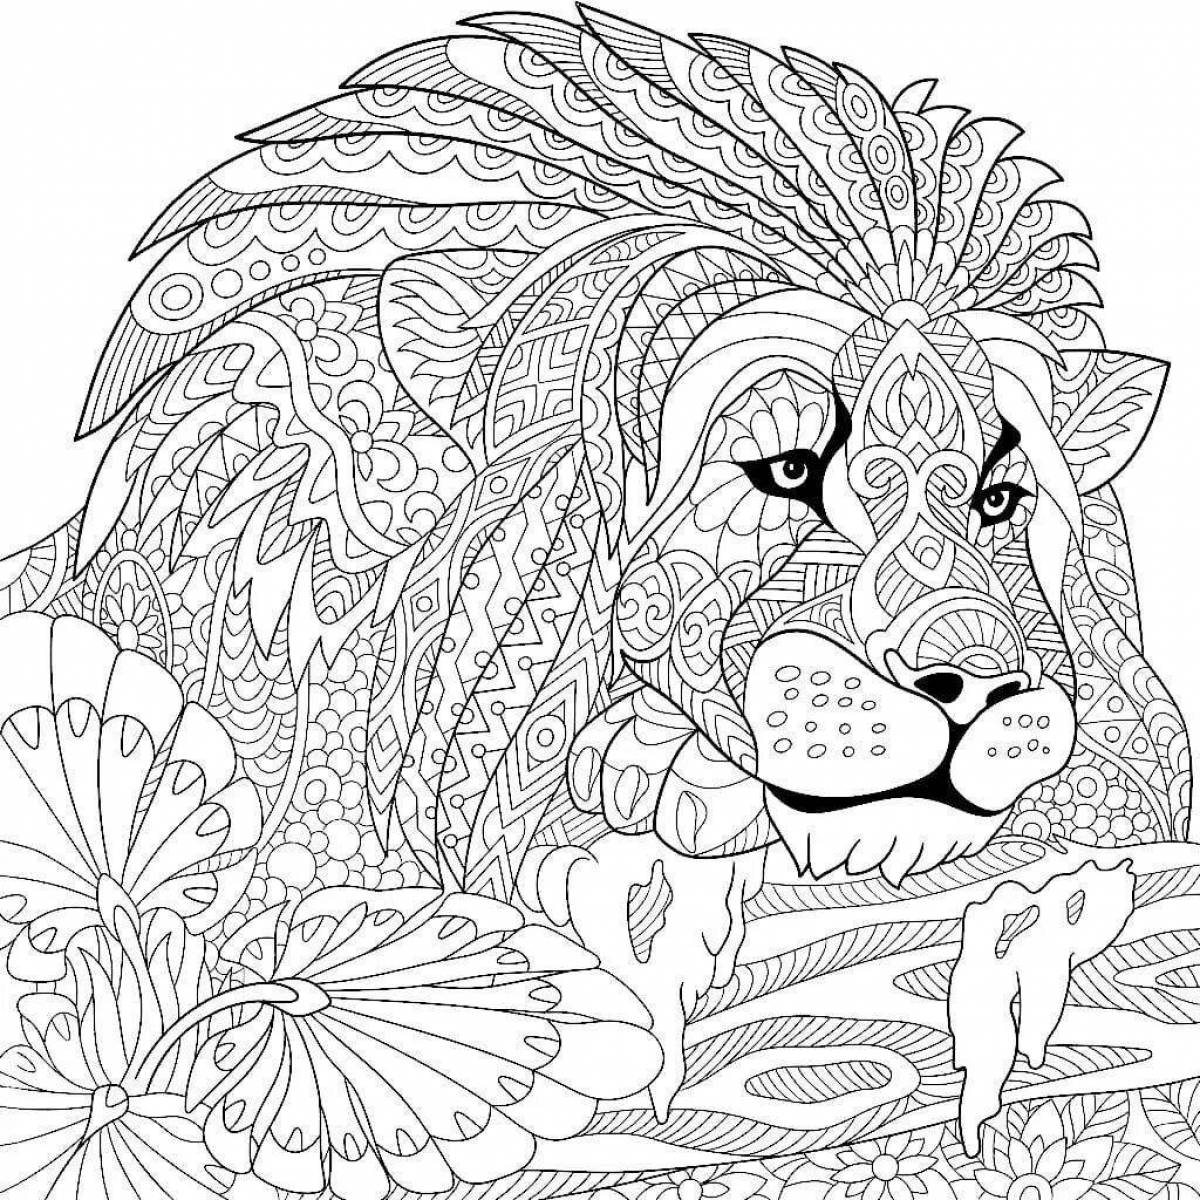 Coloring supreme for girls 10 years old - very beautiful animals